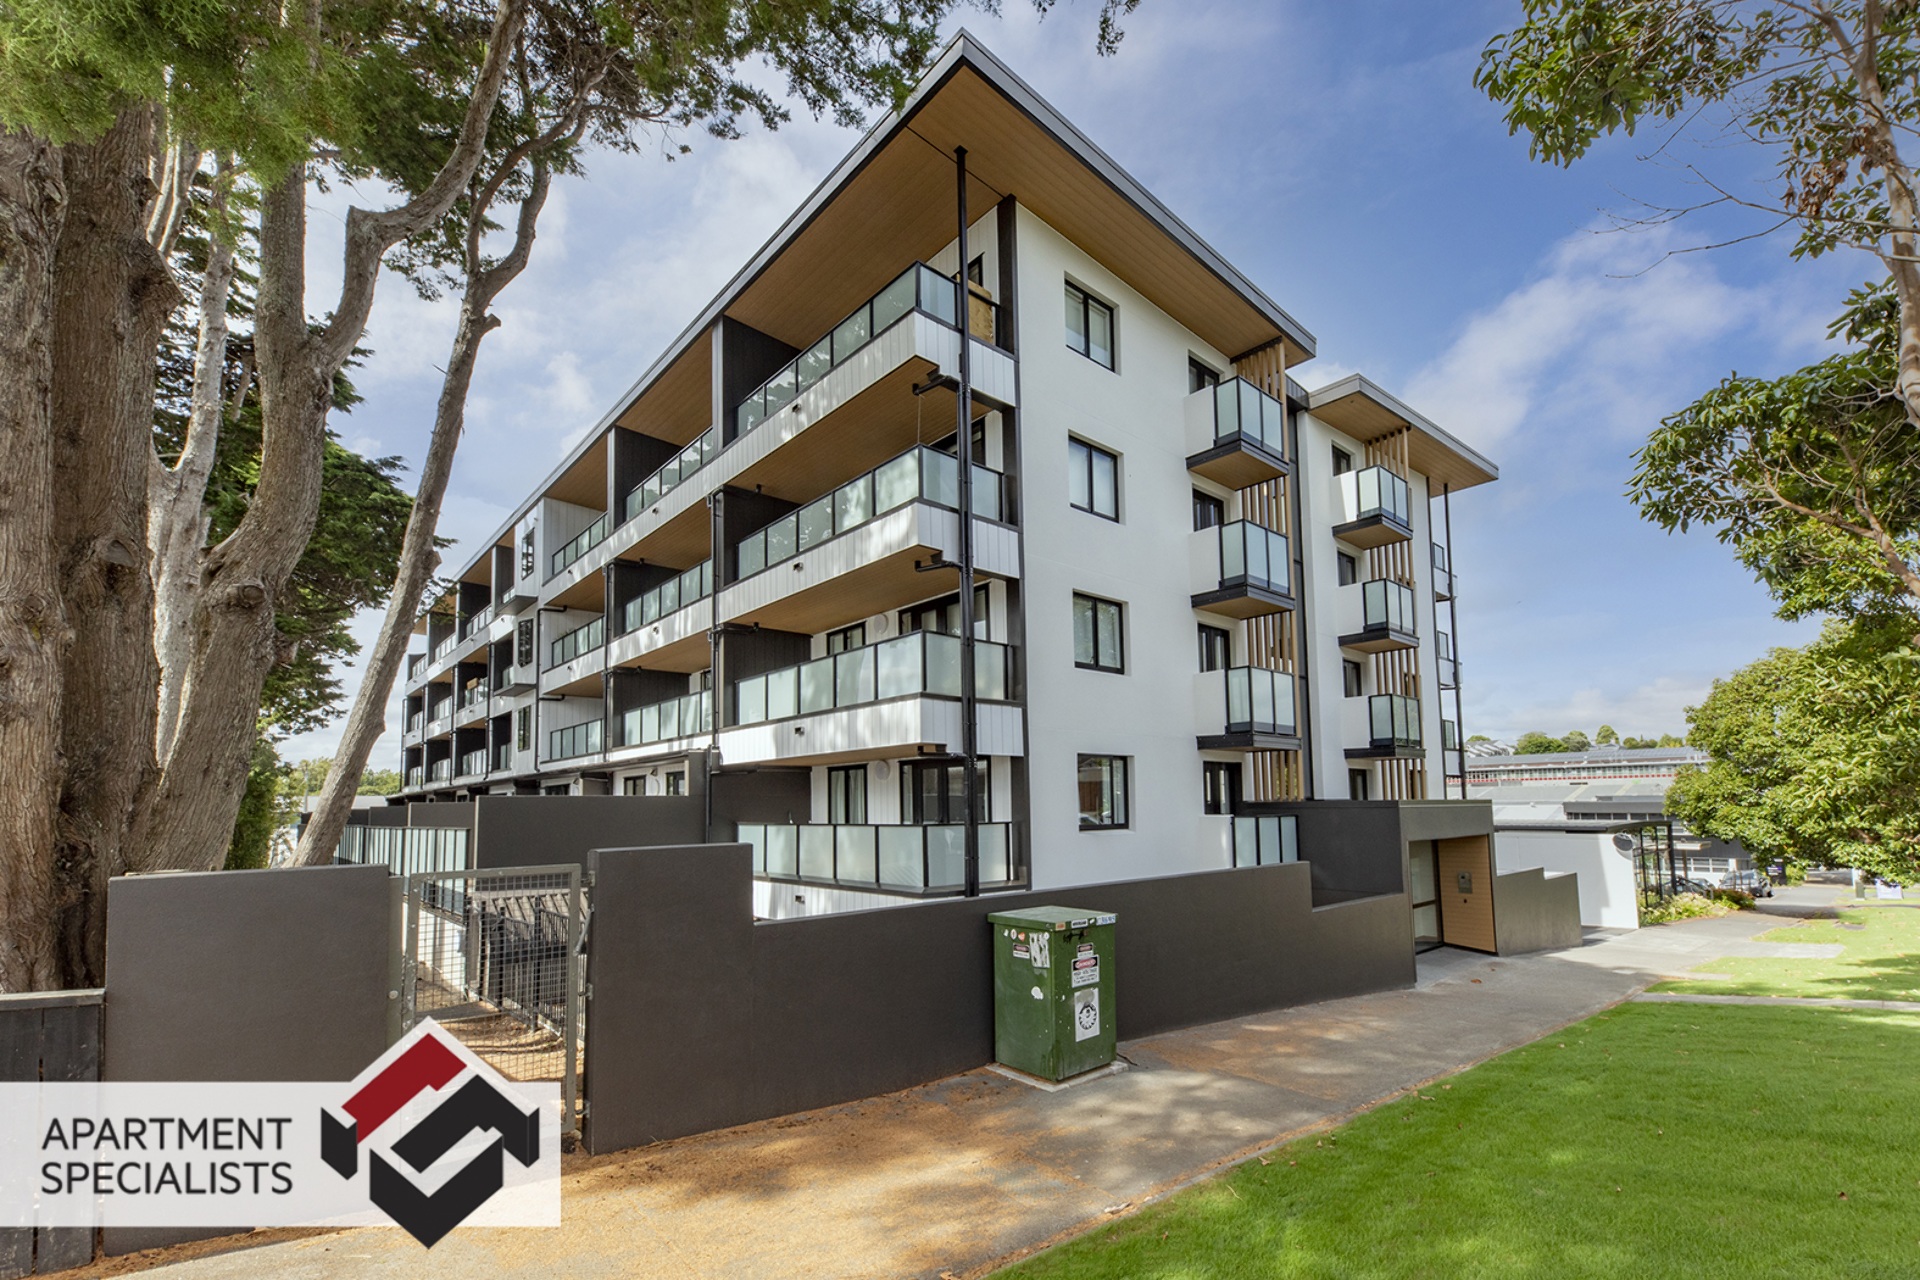 9 | 250 Richmond Road, Ponsonby | Apartment Specialists